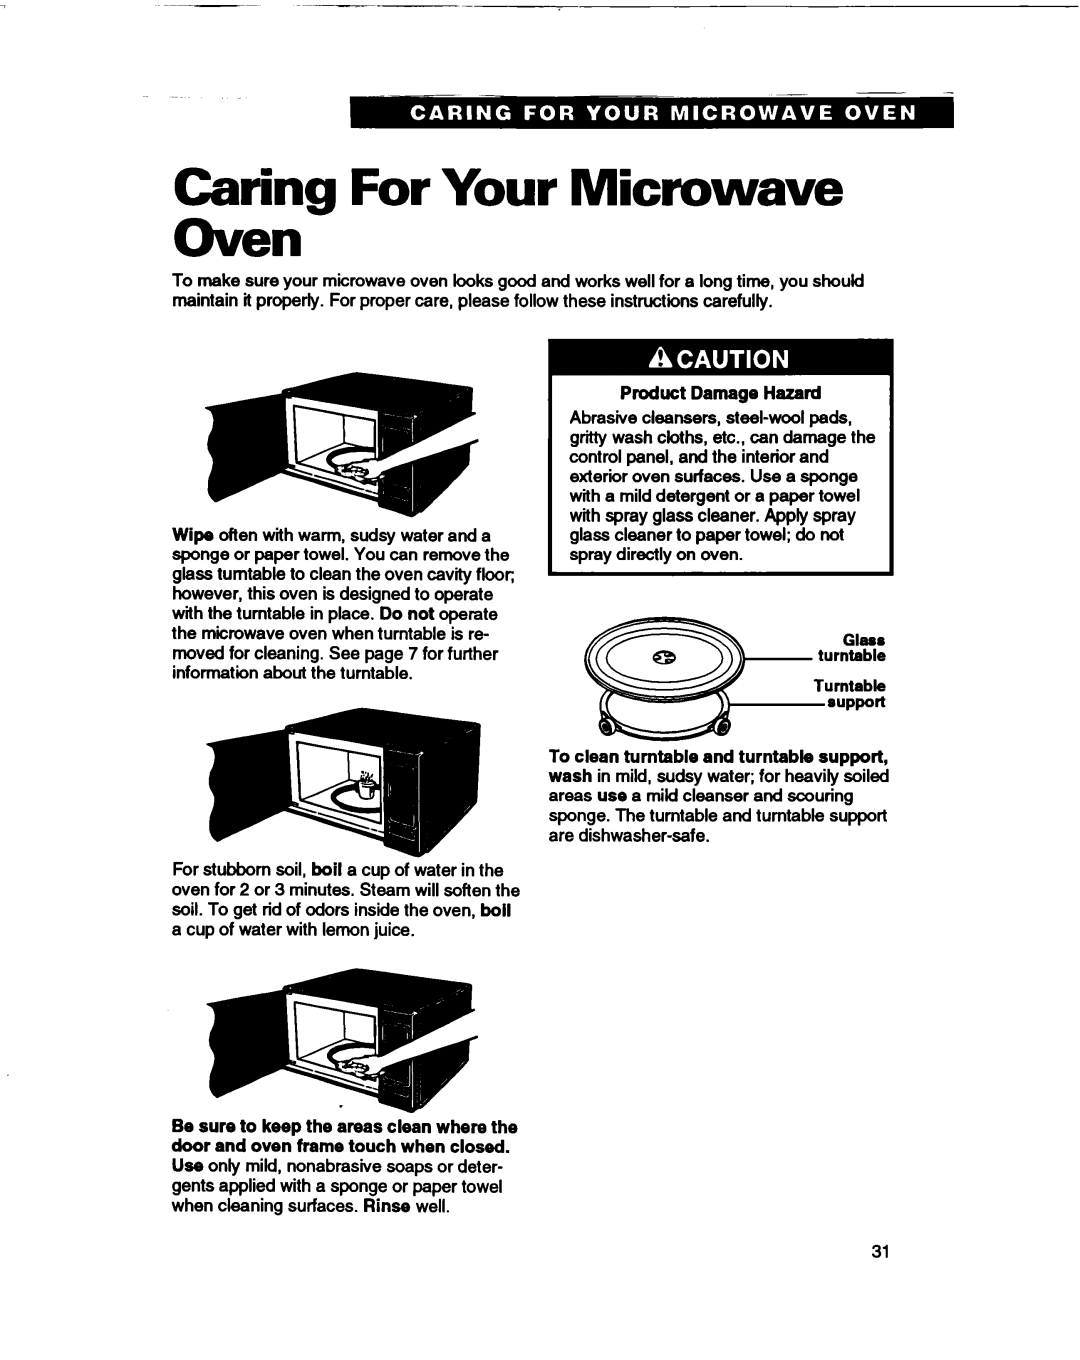 Whirlpool MT1061XB installation instructions Caring For Your Microwave Oven, Product Damage Hazard 